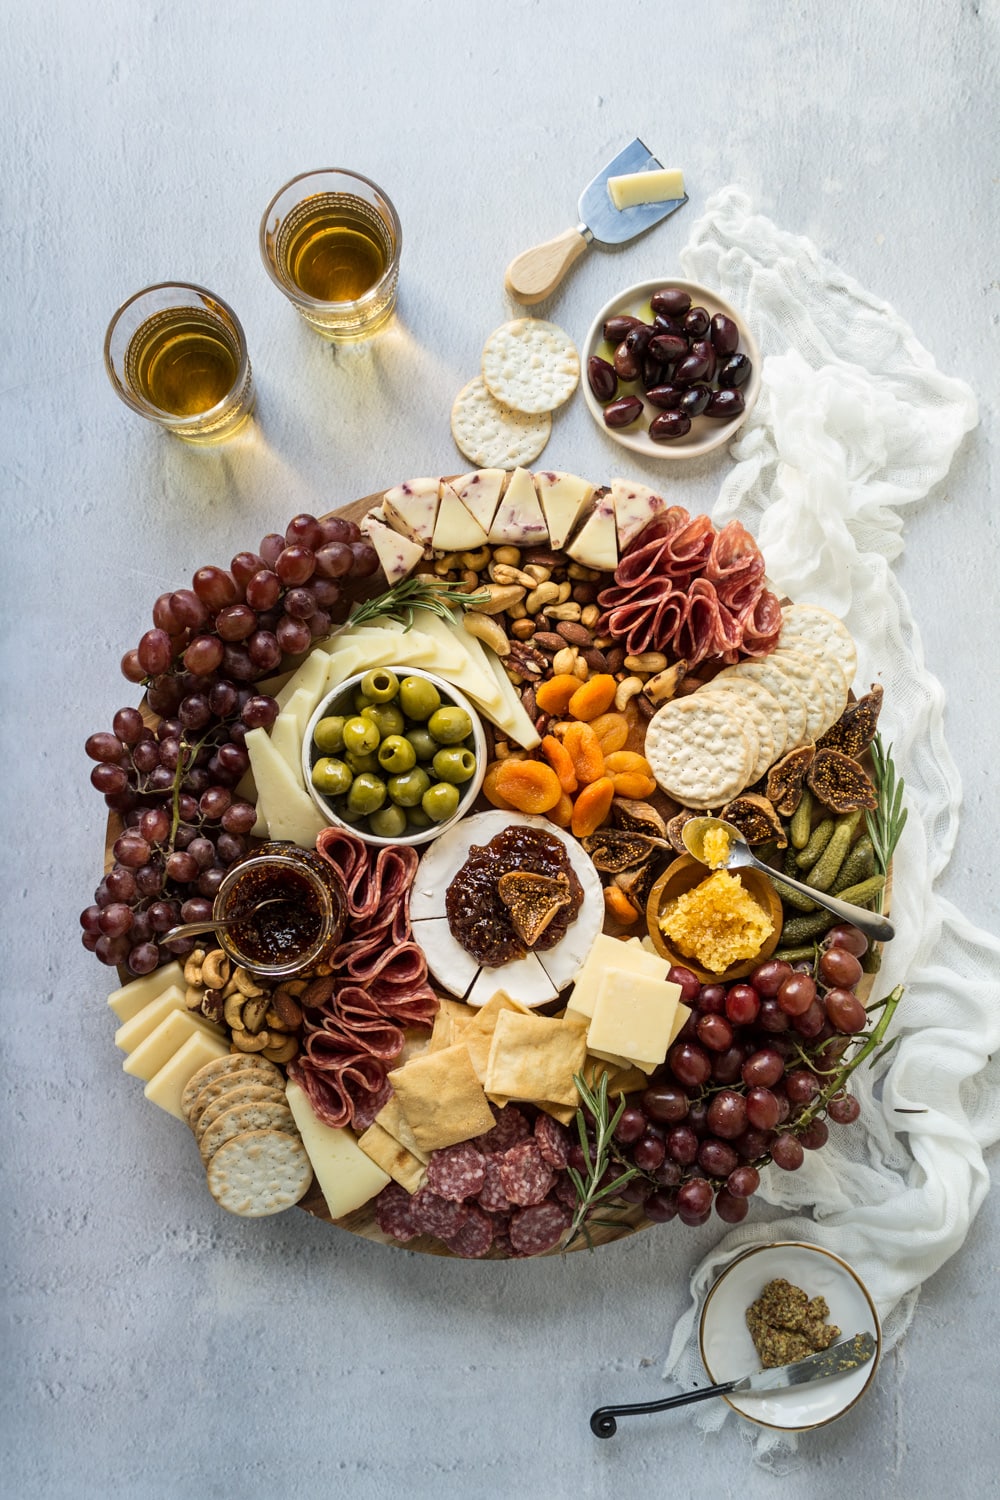 Ultimate Cheese Board - with free shipping